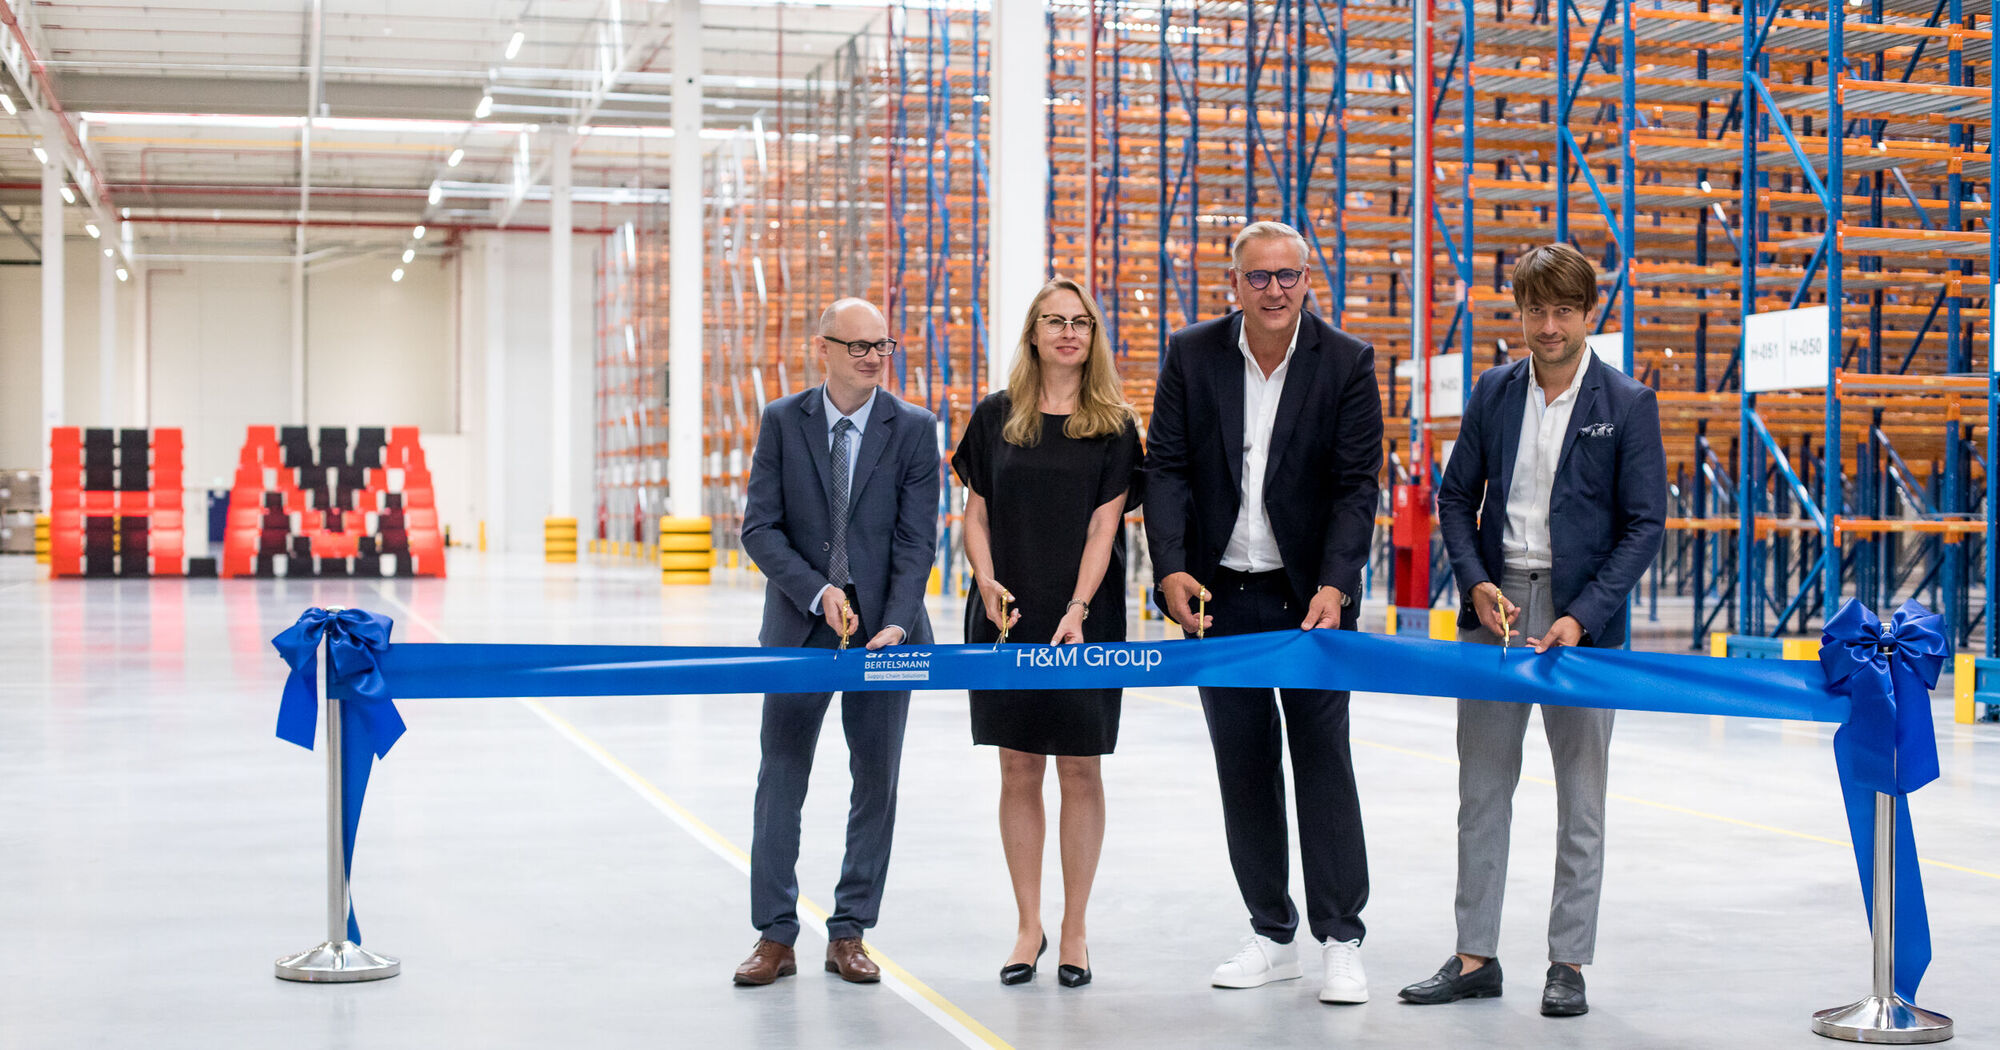 https://arvato.com/fileadmin/_processed_/f/0/csm_2022-08-10_Opening_with_H_M_Arvato_Supply_Chain_Solutions_880d159e05.jpg